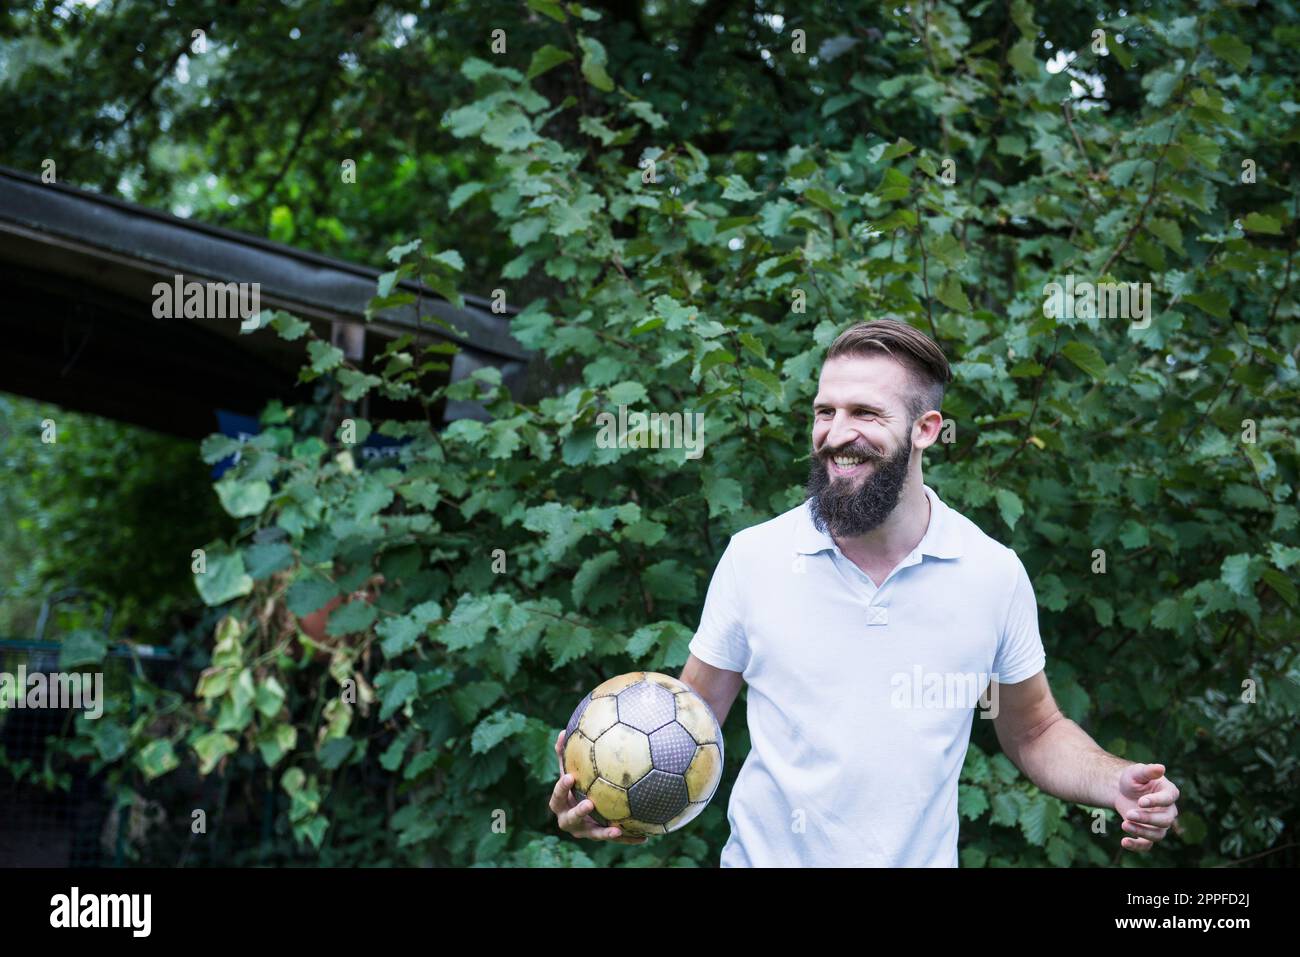 Happy young man playing football in garden, Bavaria, Germany Stock Photo